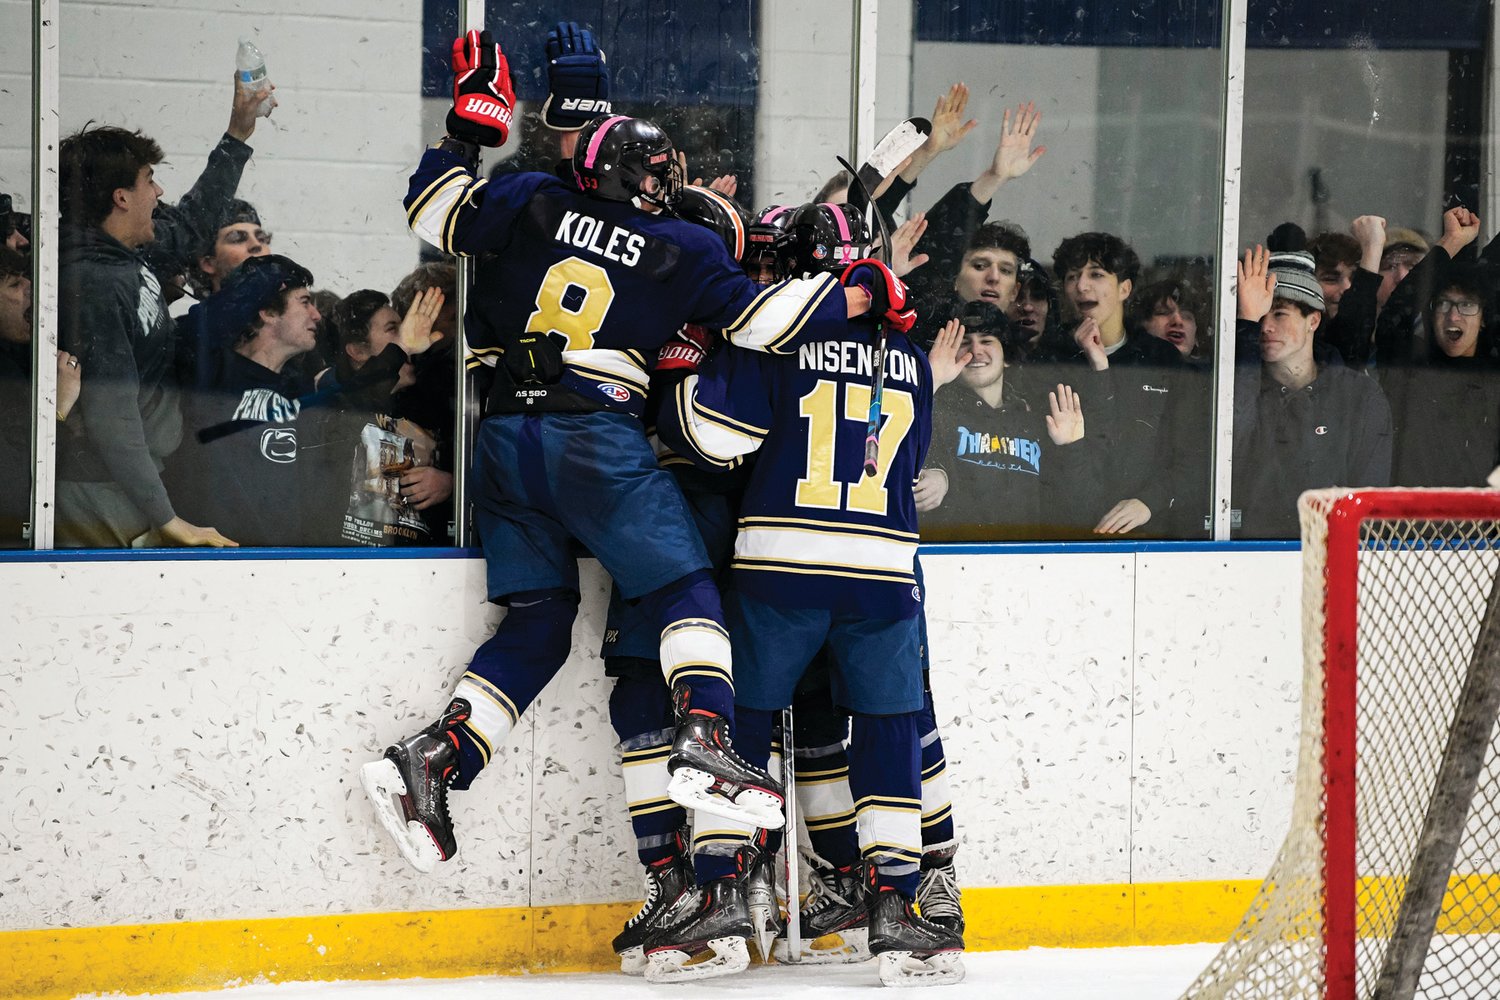 CR South players mob Chase Tovsky after scoring the fifth goal as the student section cheers from behind the net.